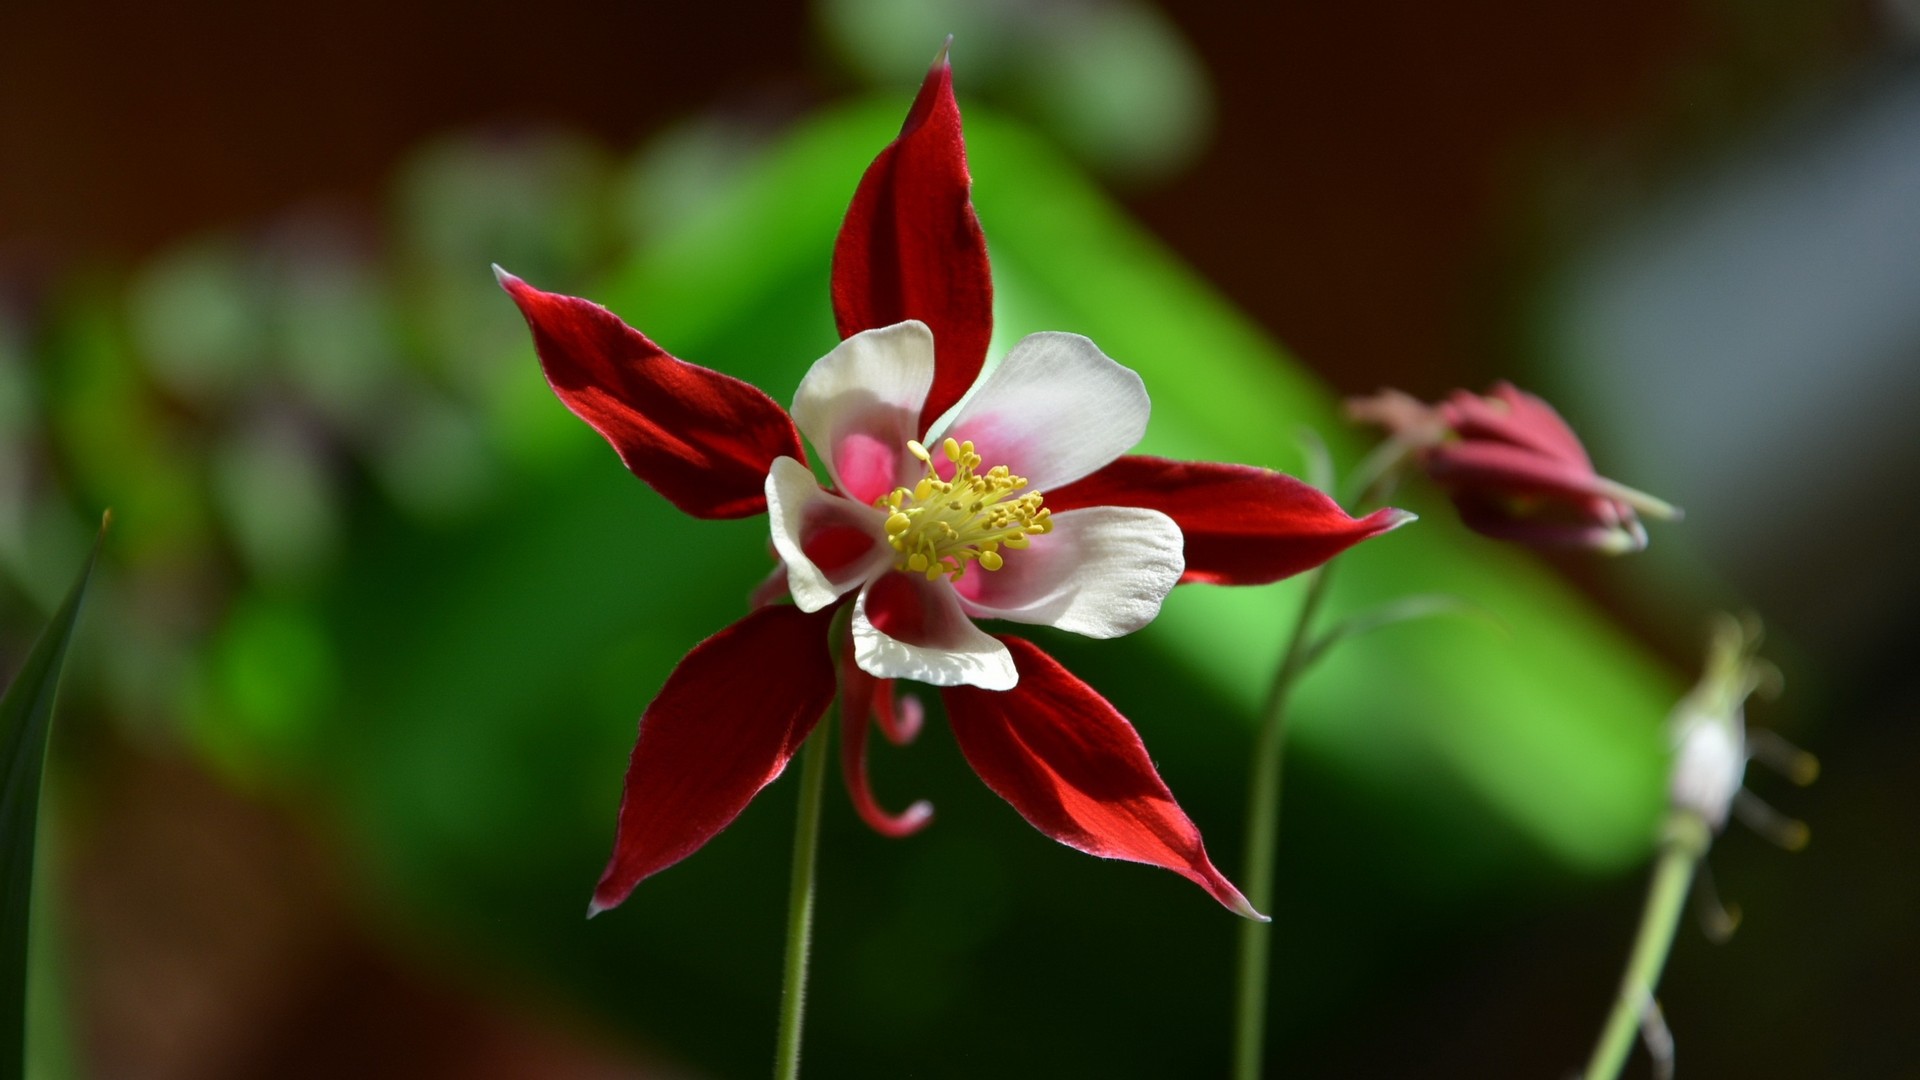 Red-white flower wallpapers and images - wallpapers, pictures, photos